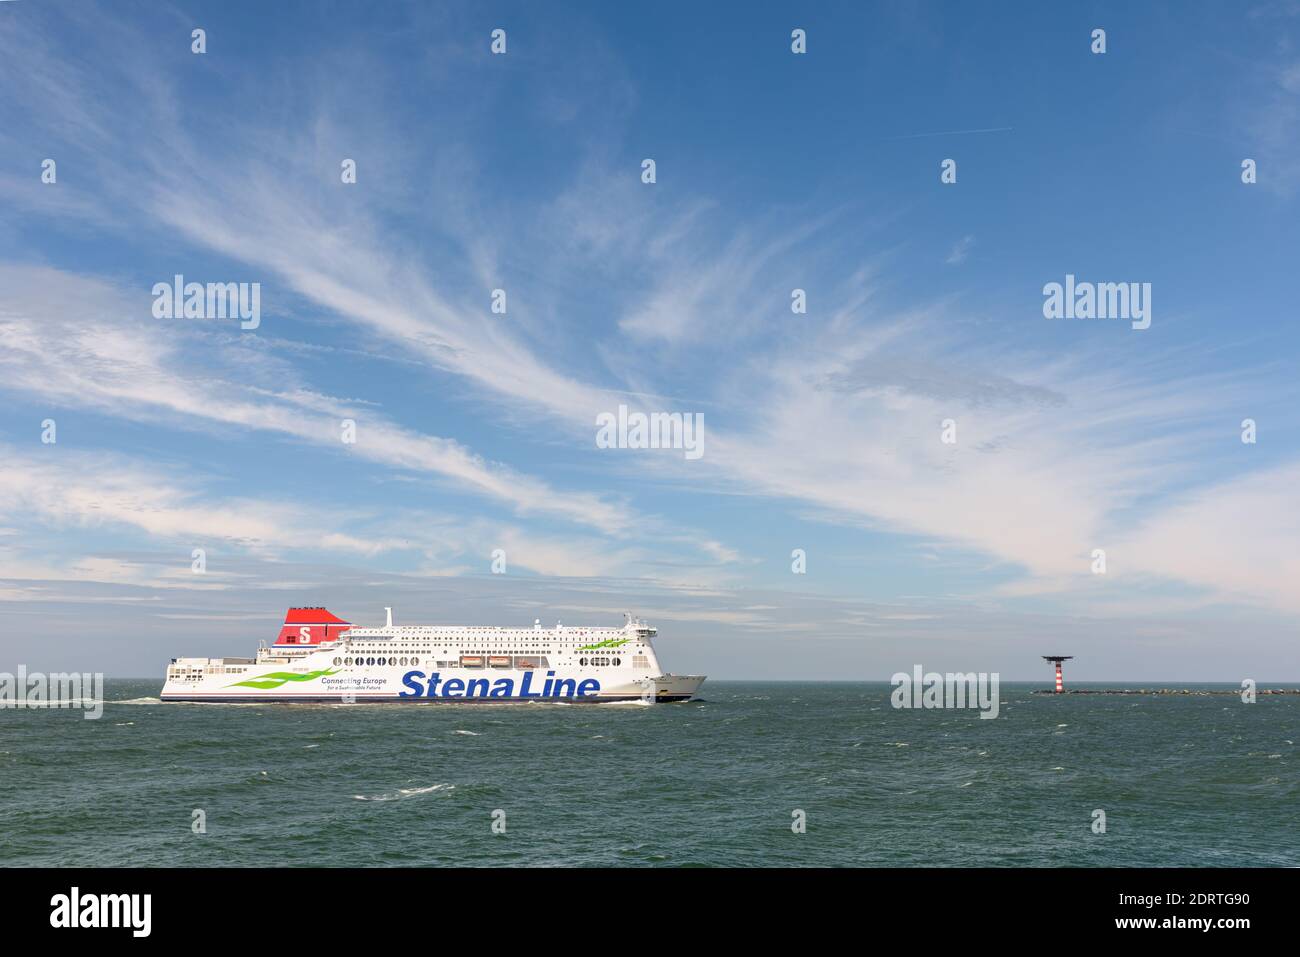 HOEK VAN HOLLAND, THE NETHERLANDS - JUNE 23, 2017: The ferry Stena Britannica of the Stena Line arrives at the entrance of the Nieuwe Waterweg, near H Stock Photo